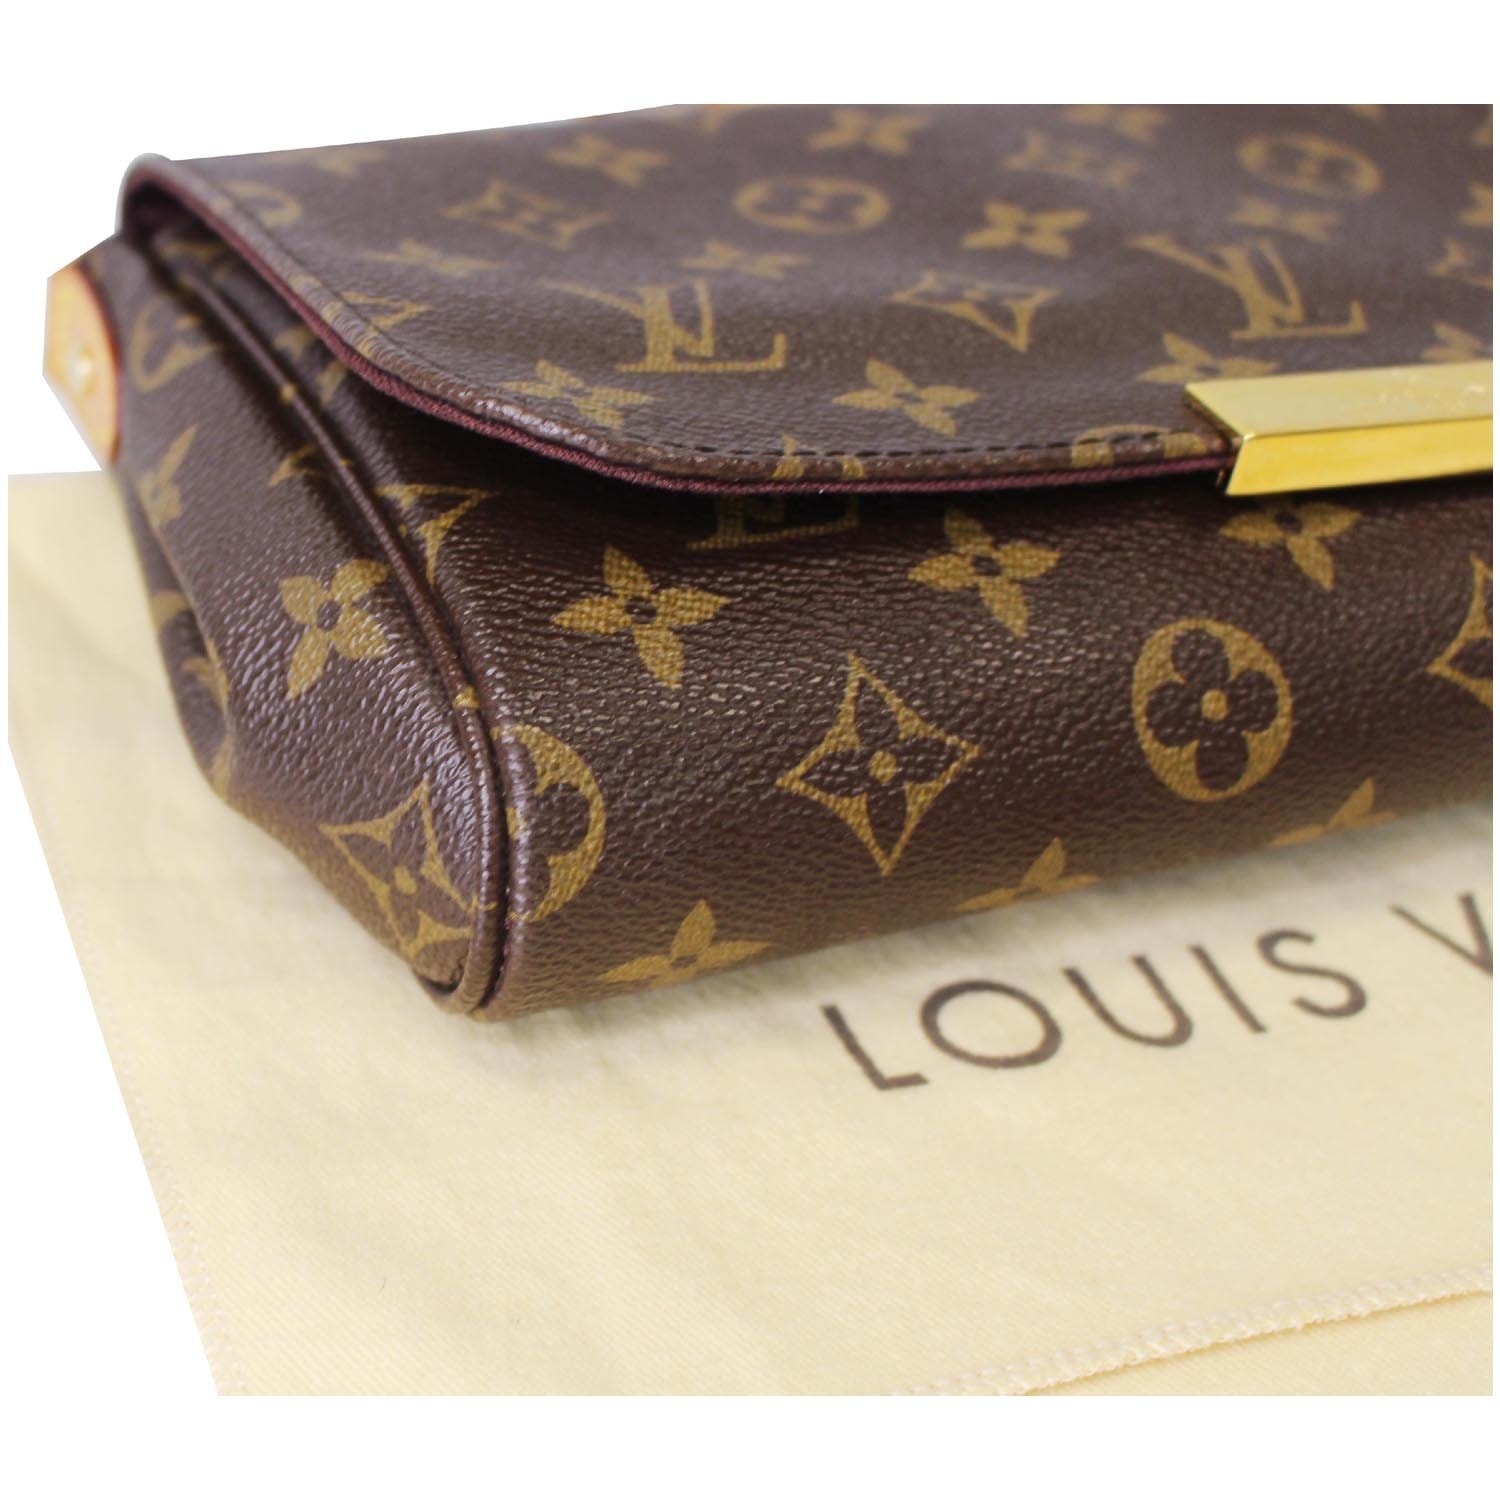 How To Spot Authentic Louis Vuitton Favorite MM Bag and Where To